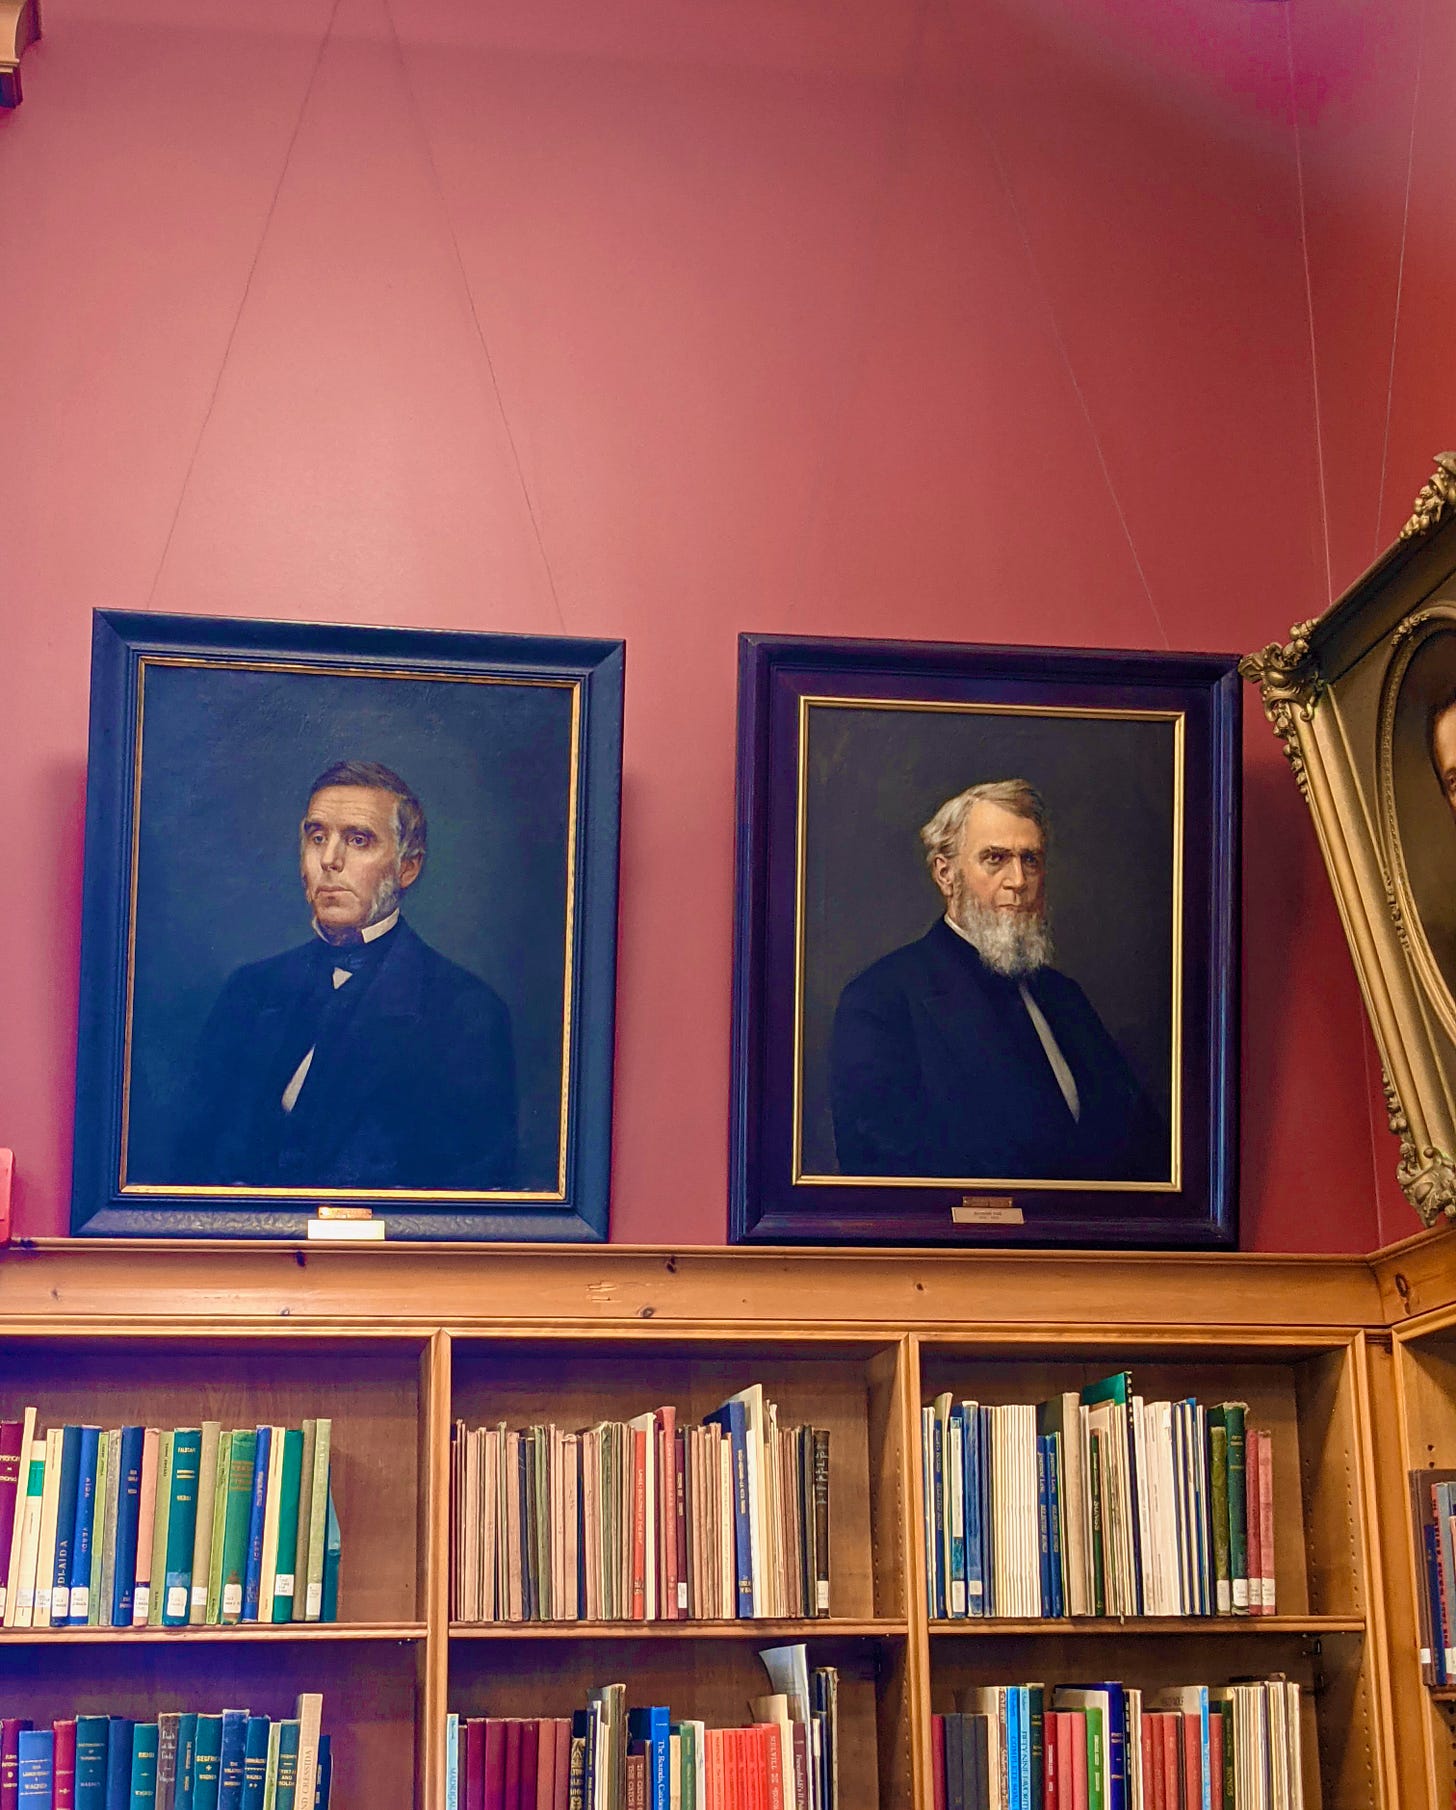 A library wall, painted dark pink with several oil portraits of older, white men from the 1800s, in ornate frames. The paintings hang above several shelves of library books.